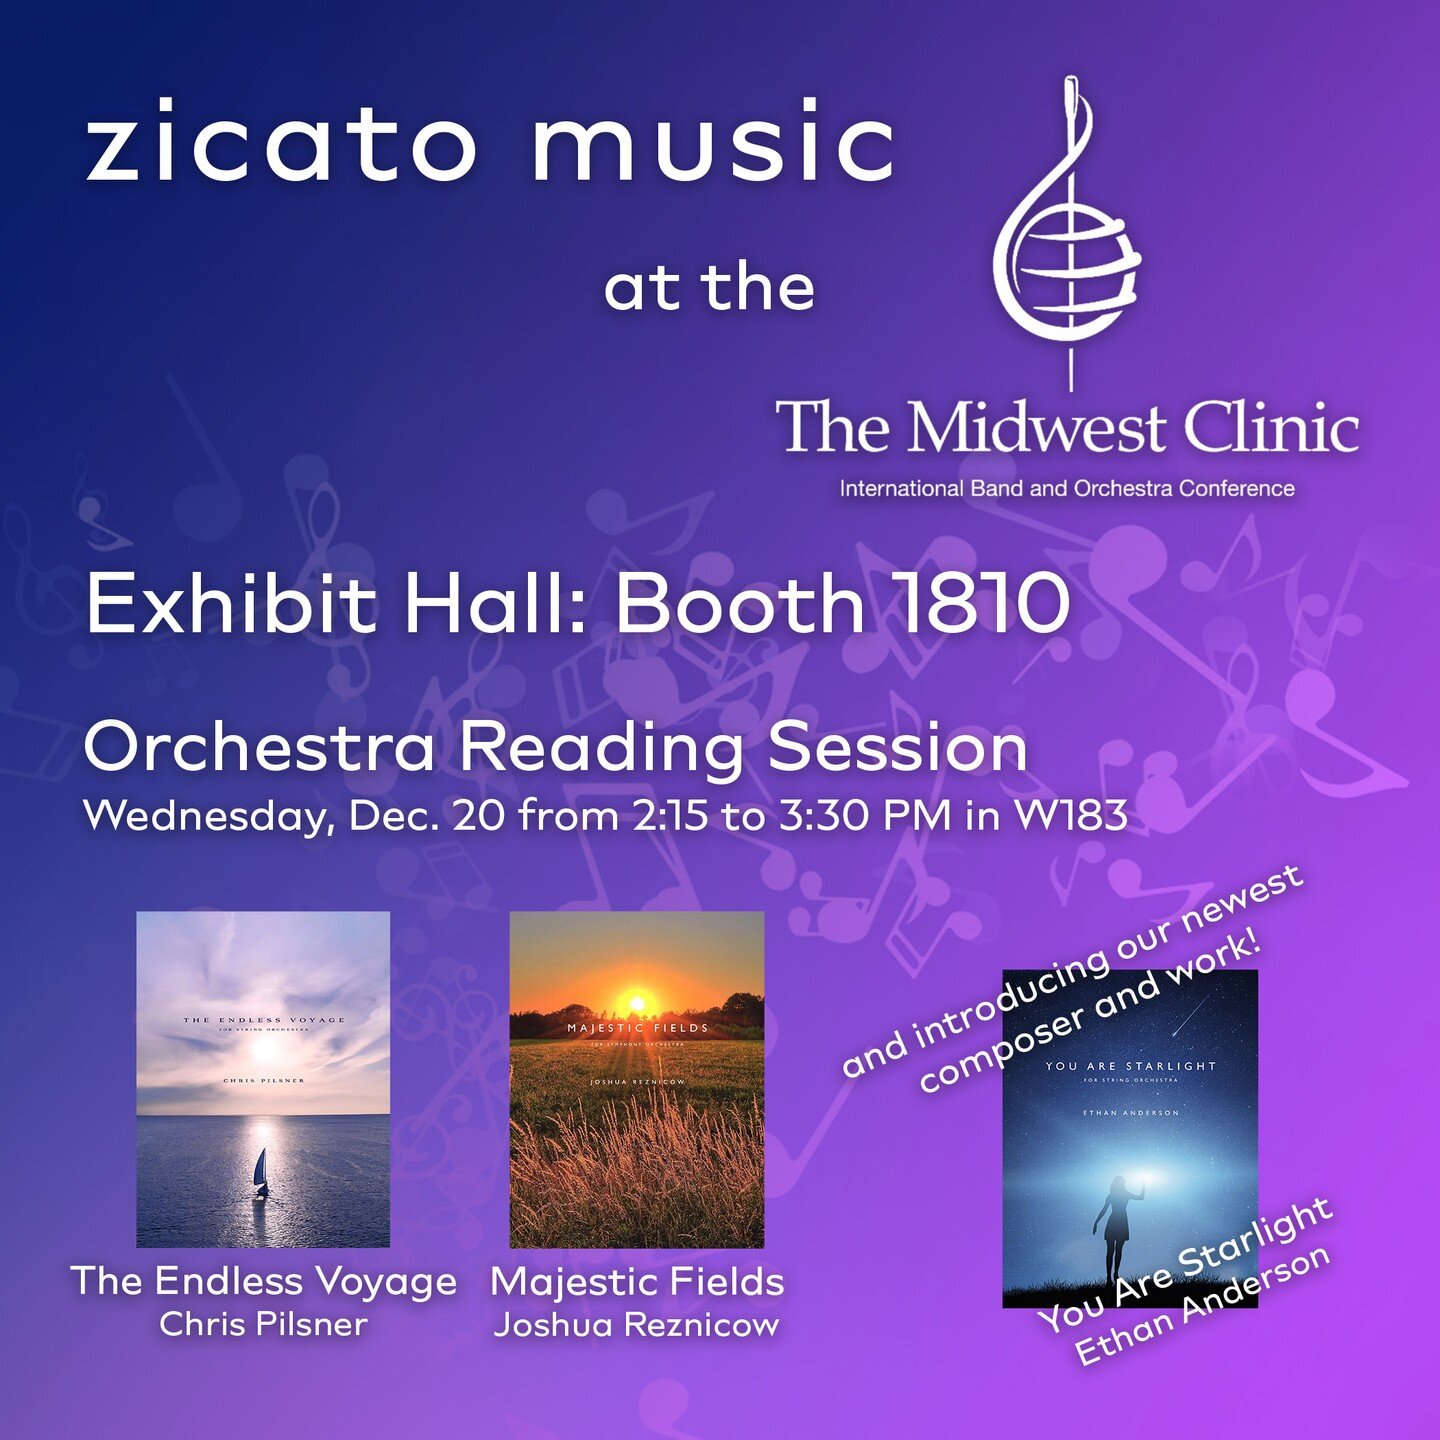 We're gearing up for The Midwest Clinic next week!
Visit us in the Exhibit Hall in Booth 1810!
Check out our new works &quot;The Endless Voyage&quot; and &quot;Majestic Fields&quot; at the Reading Session on Wednesday, December 20 from 2:15 &ndash; 3